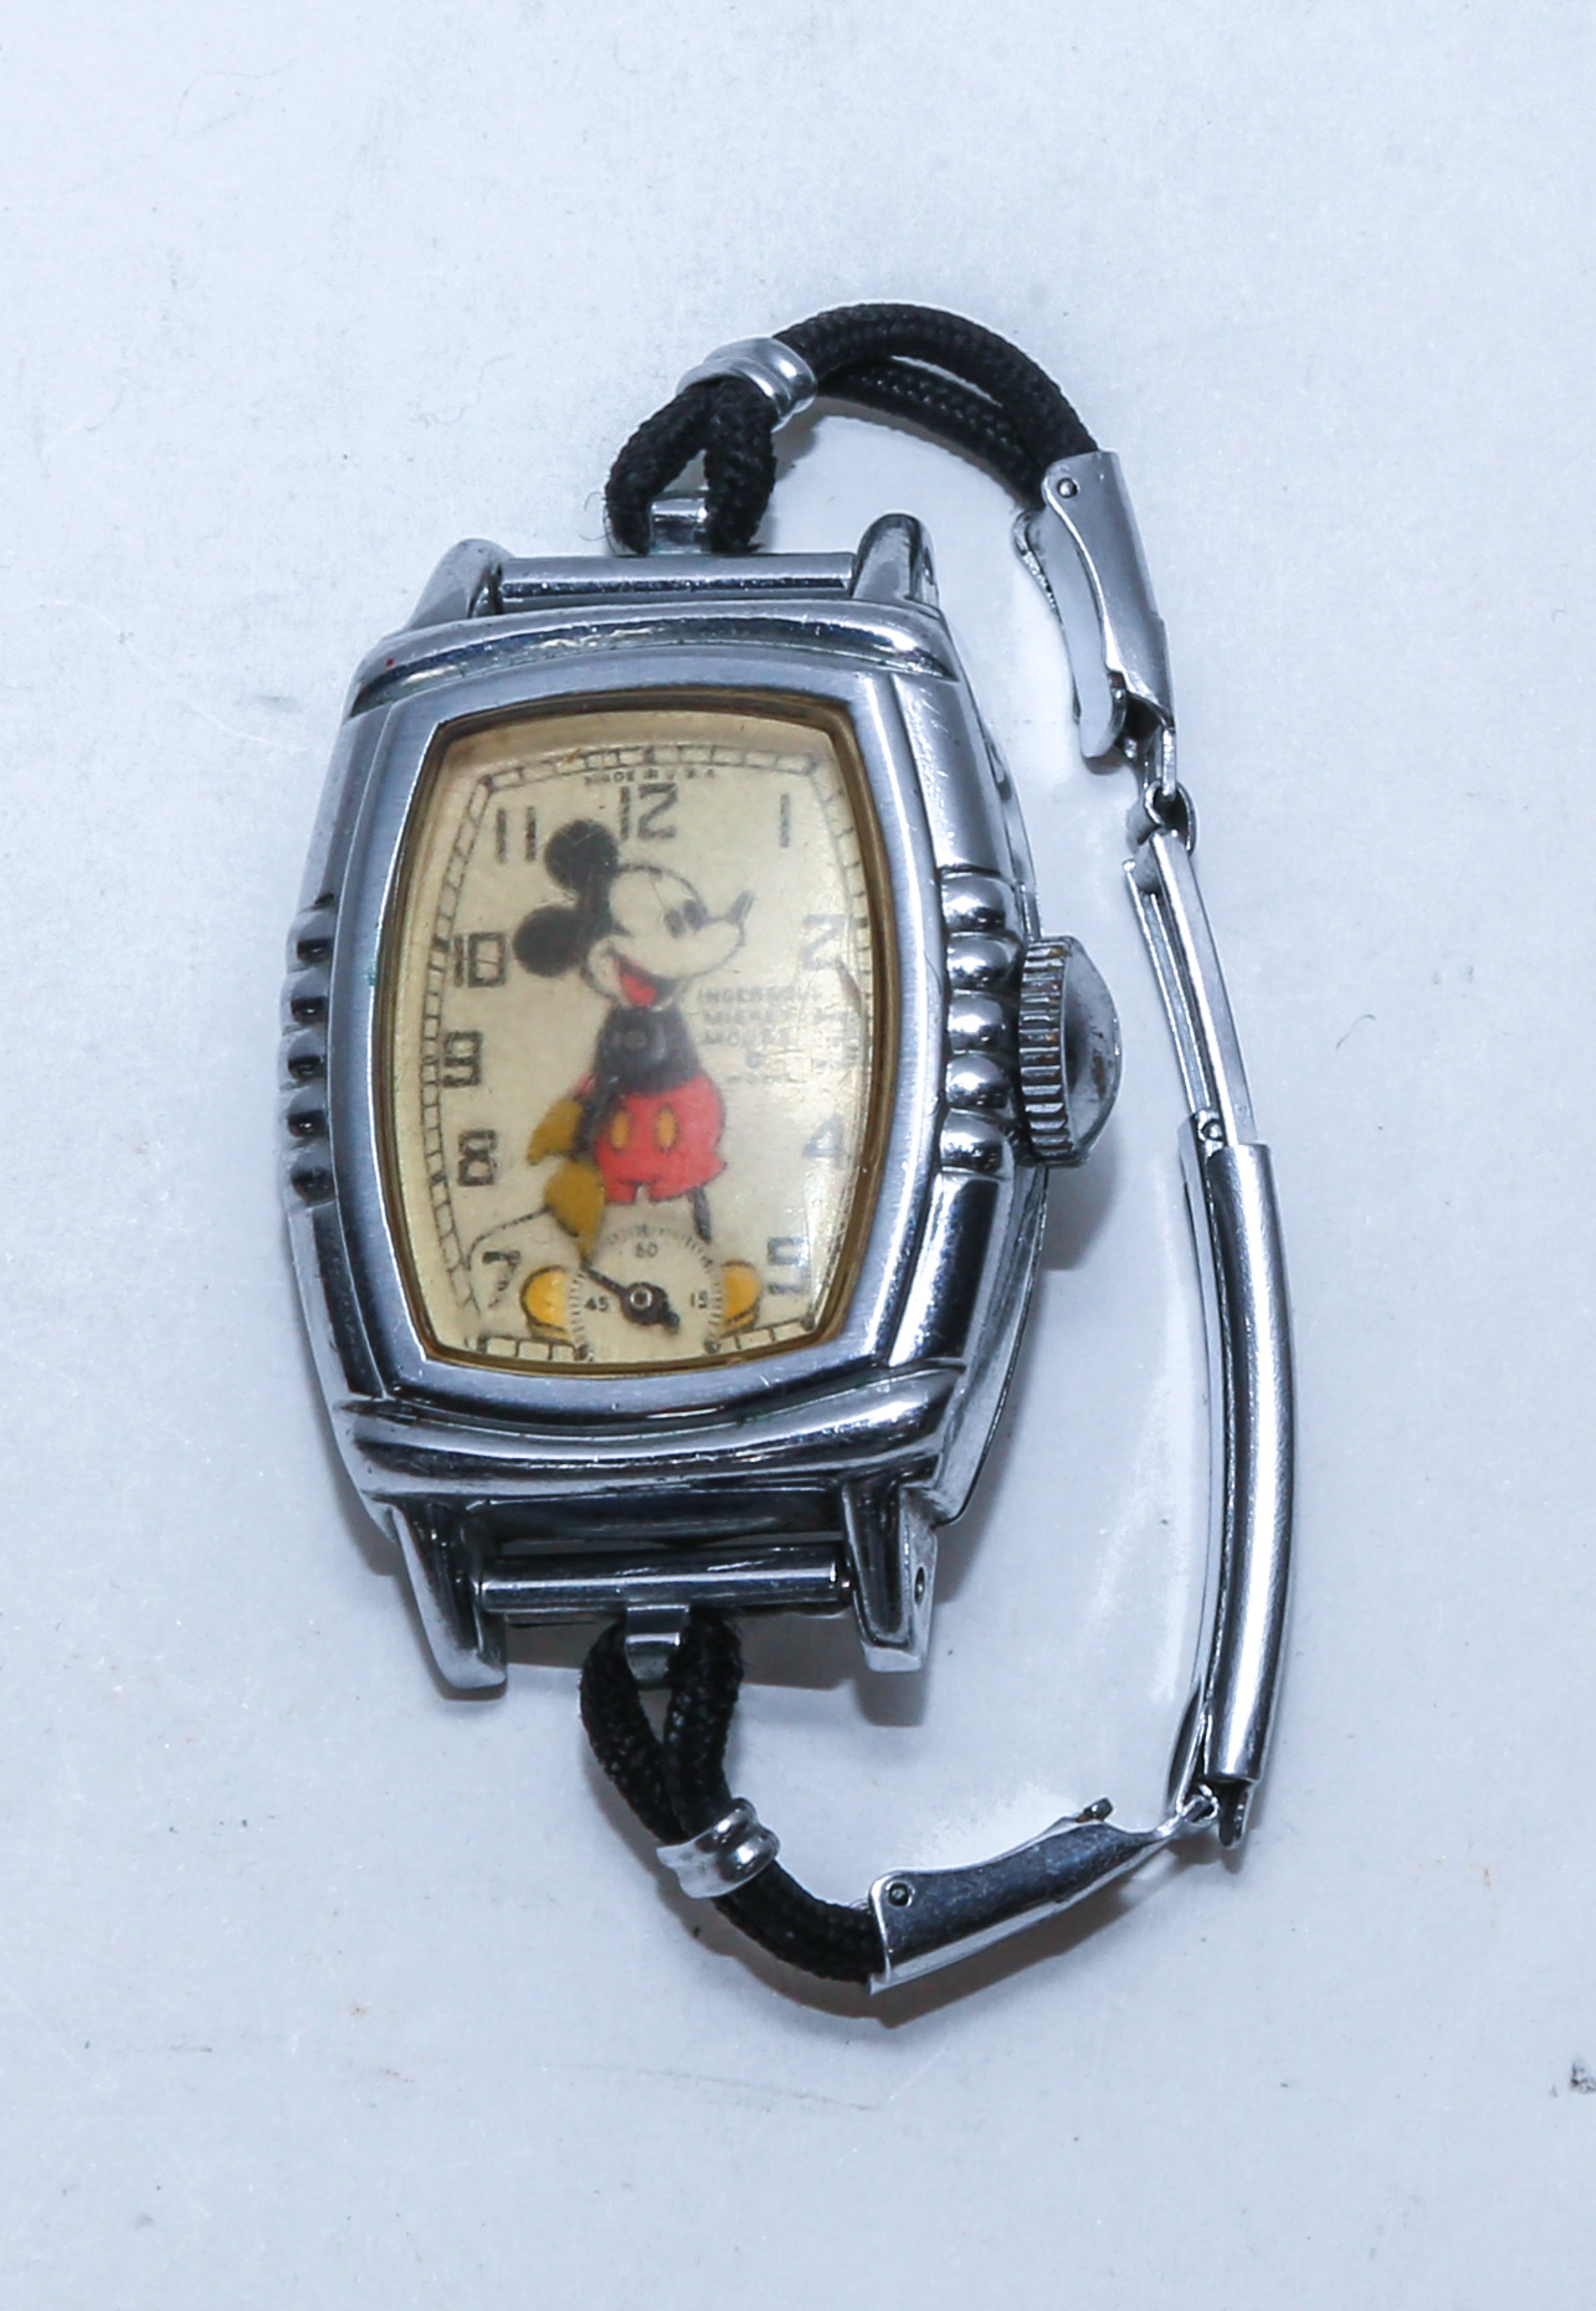 A MICKEY MOUSE WATCH BY INGERSOLL